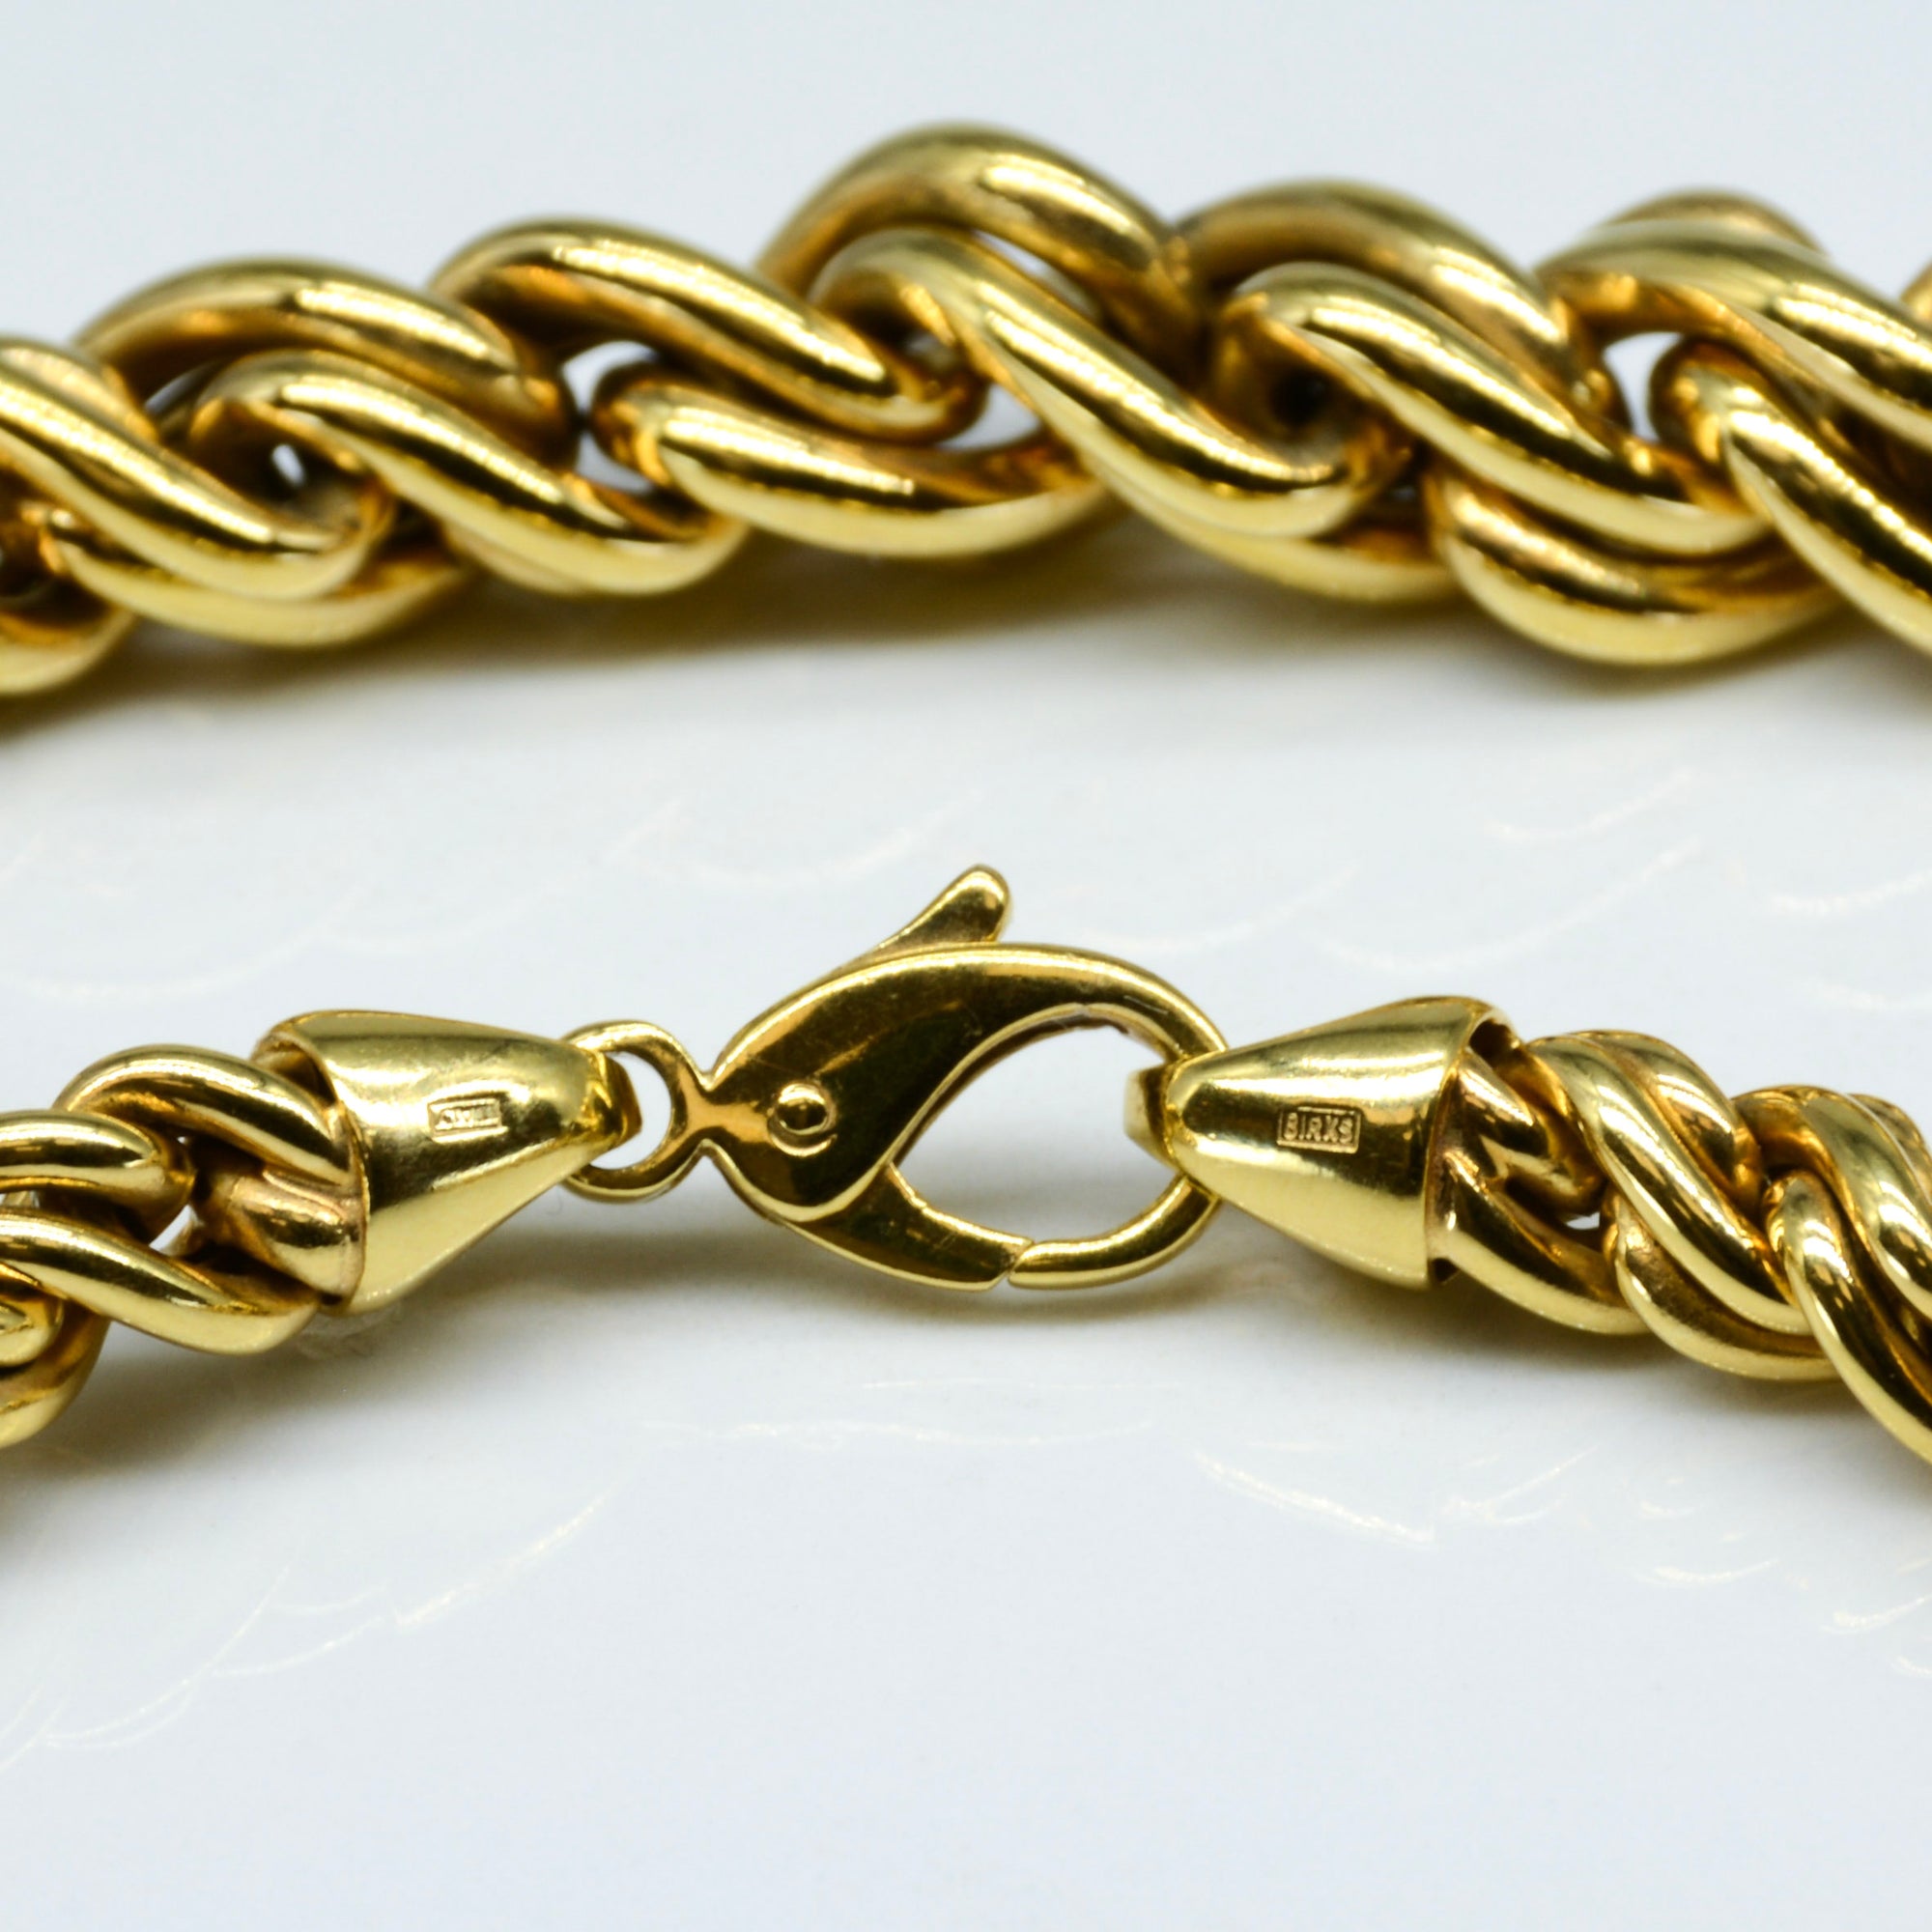 'Birks' Hollow Yellow Gold Chain Necklace | 17